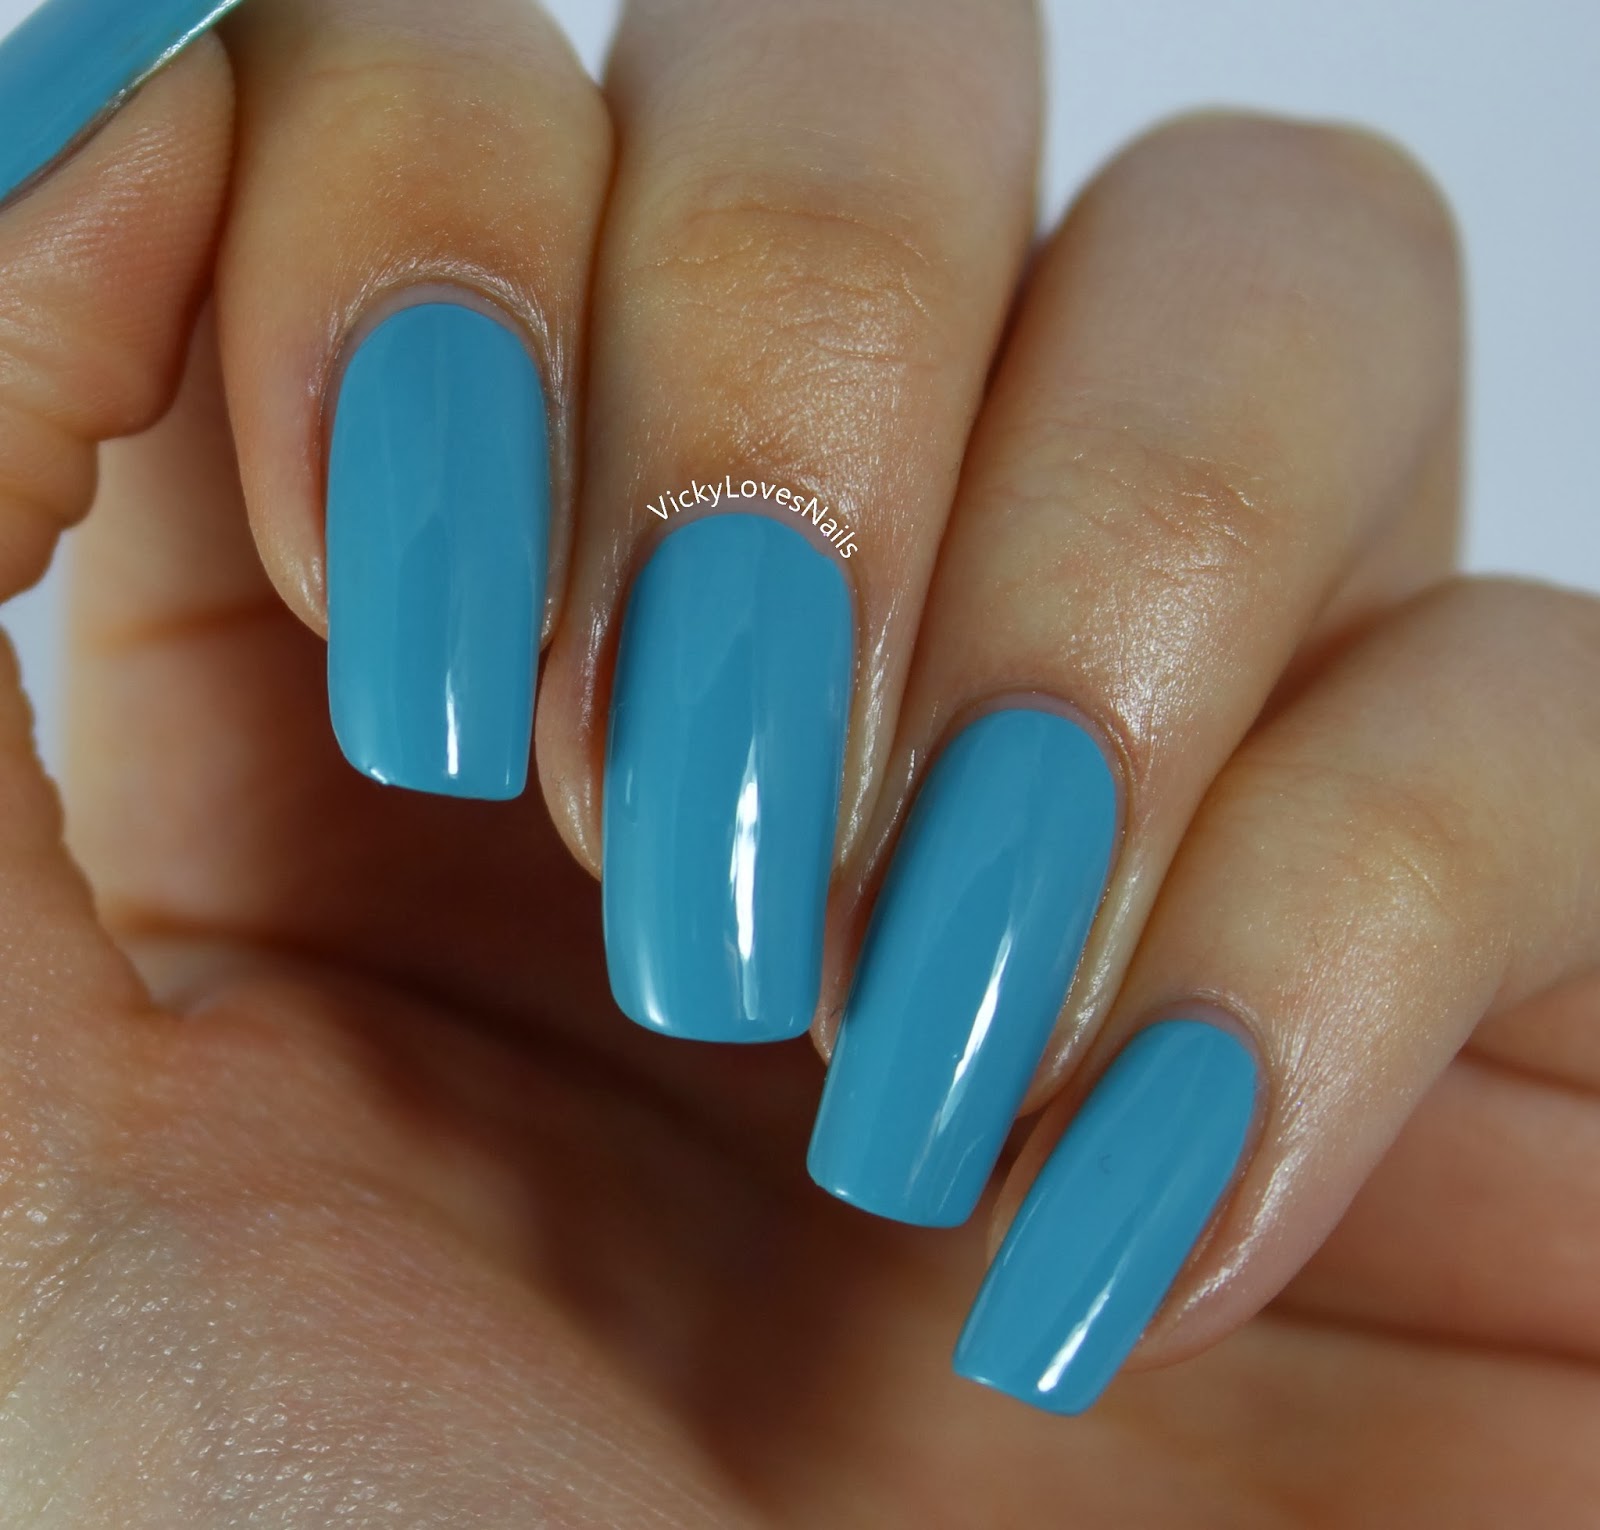 Vicky Loves Nails!: Pick A Polish: OPI - Can't Find My Czechbook